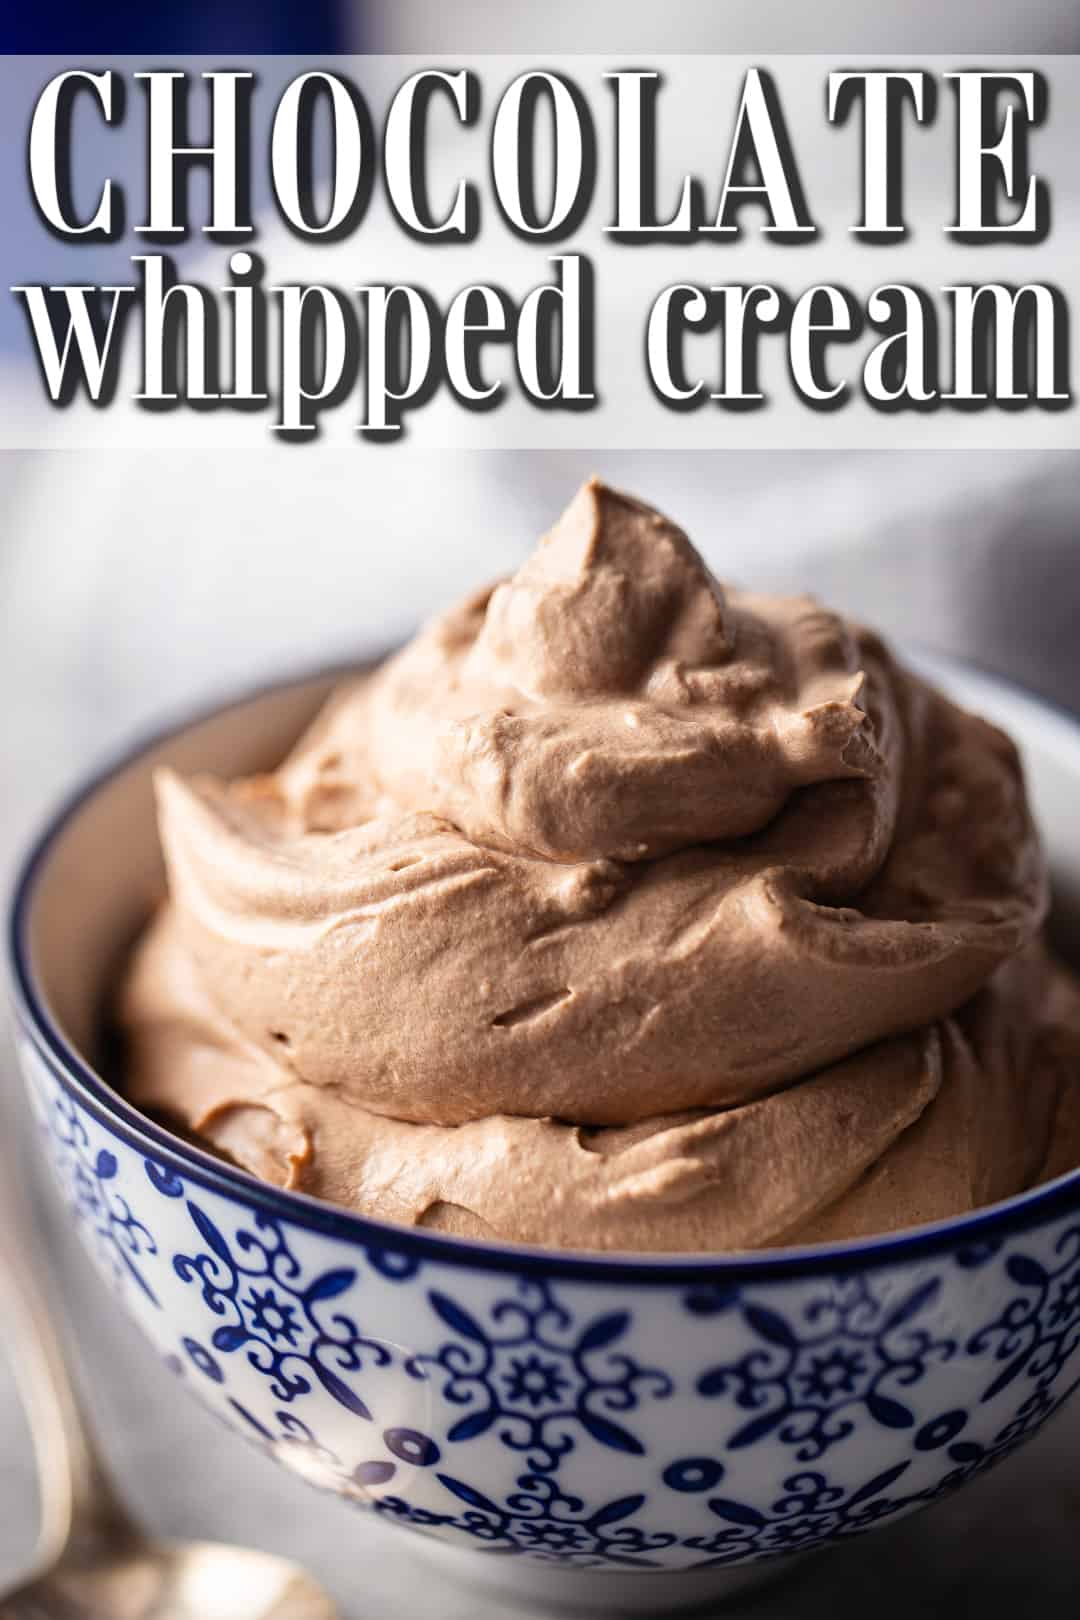 Chocolate whipped cream frosting piled into a blue and white bowl, with a text banner above.